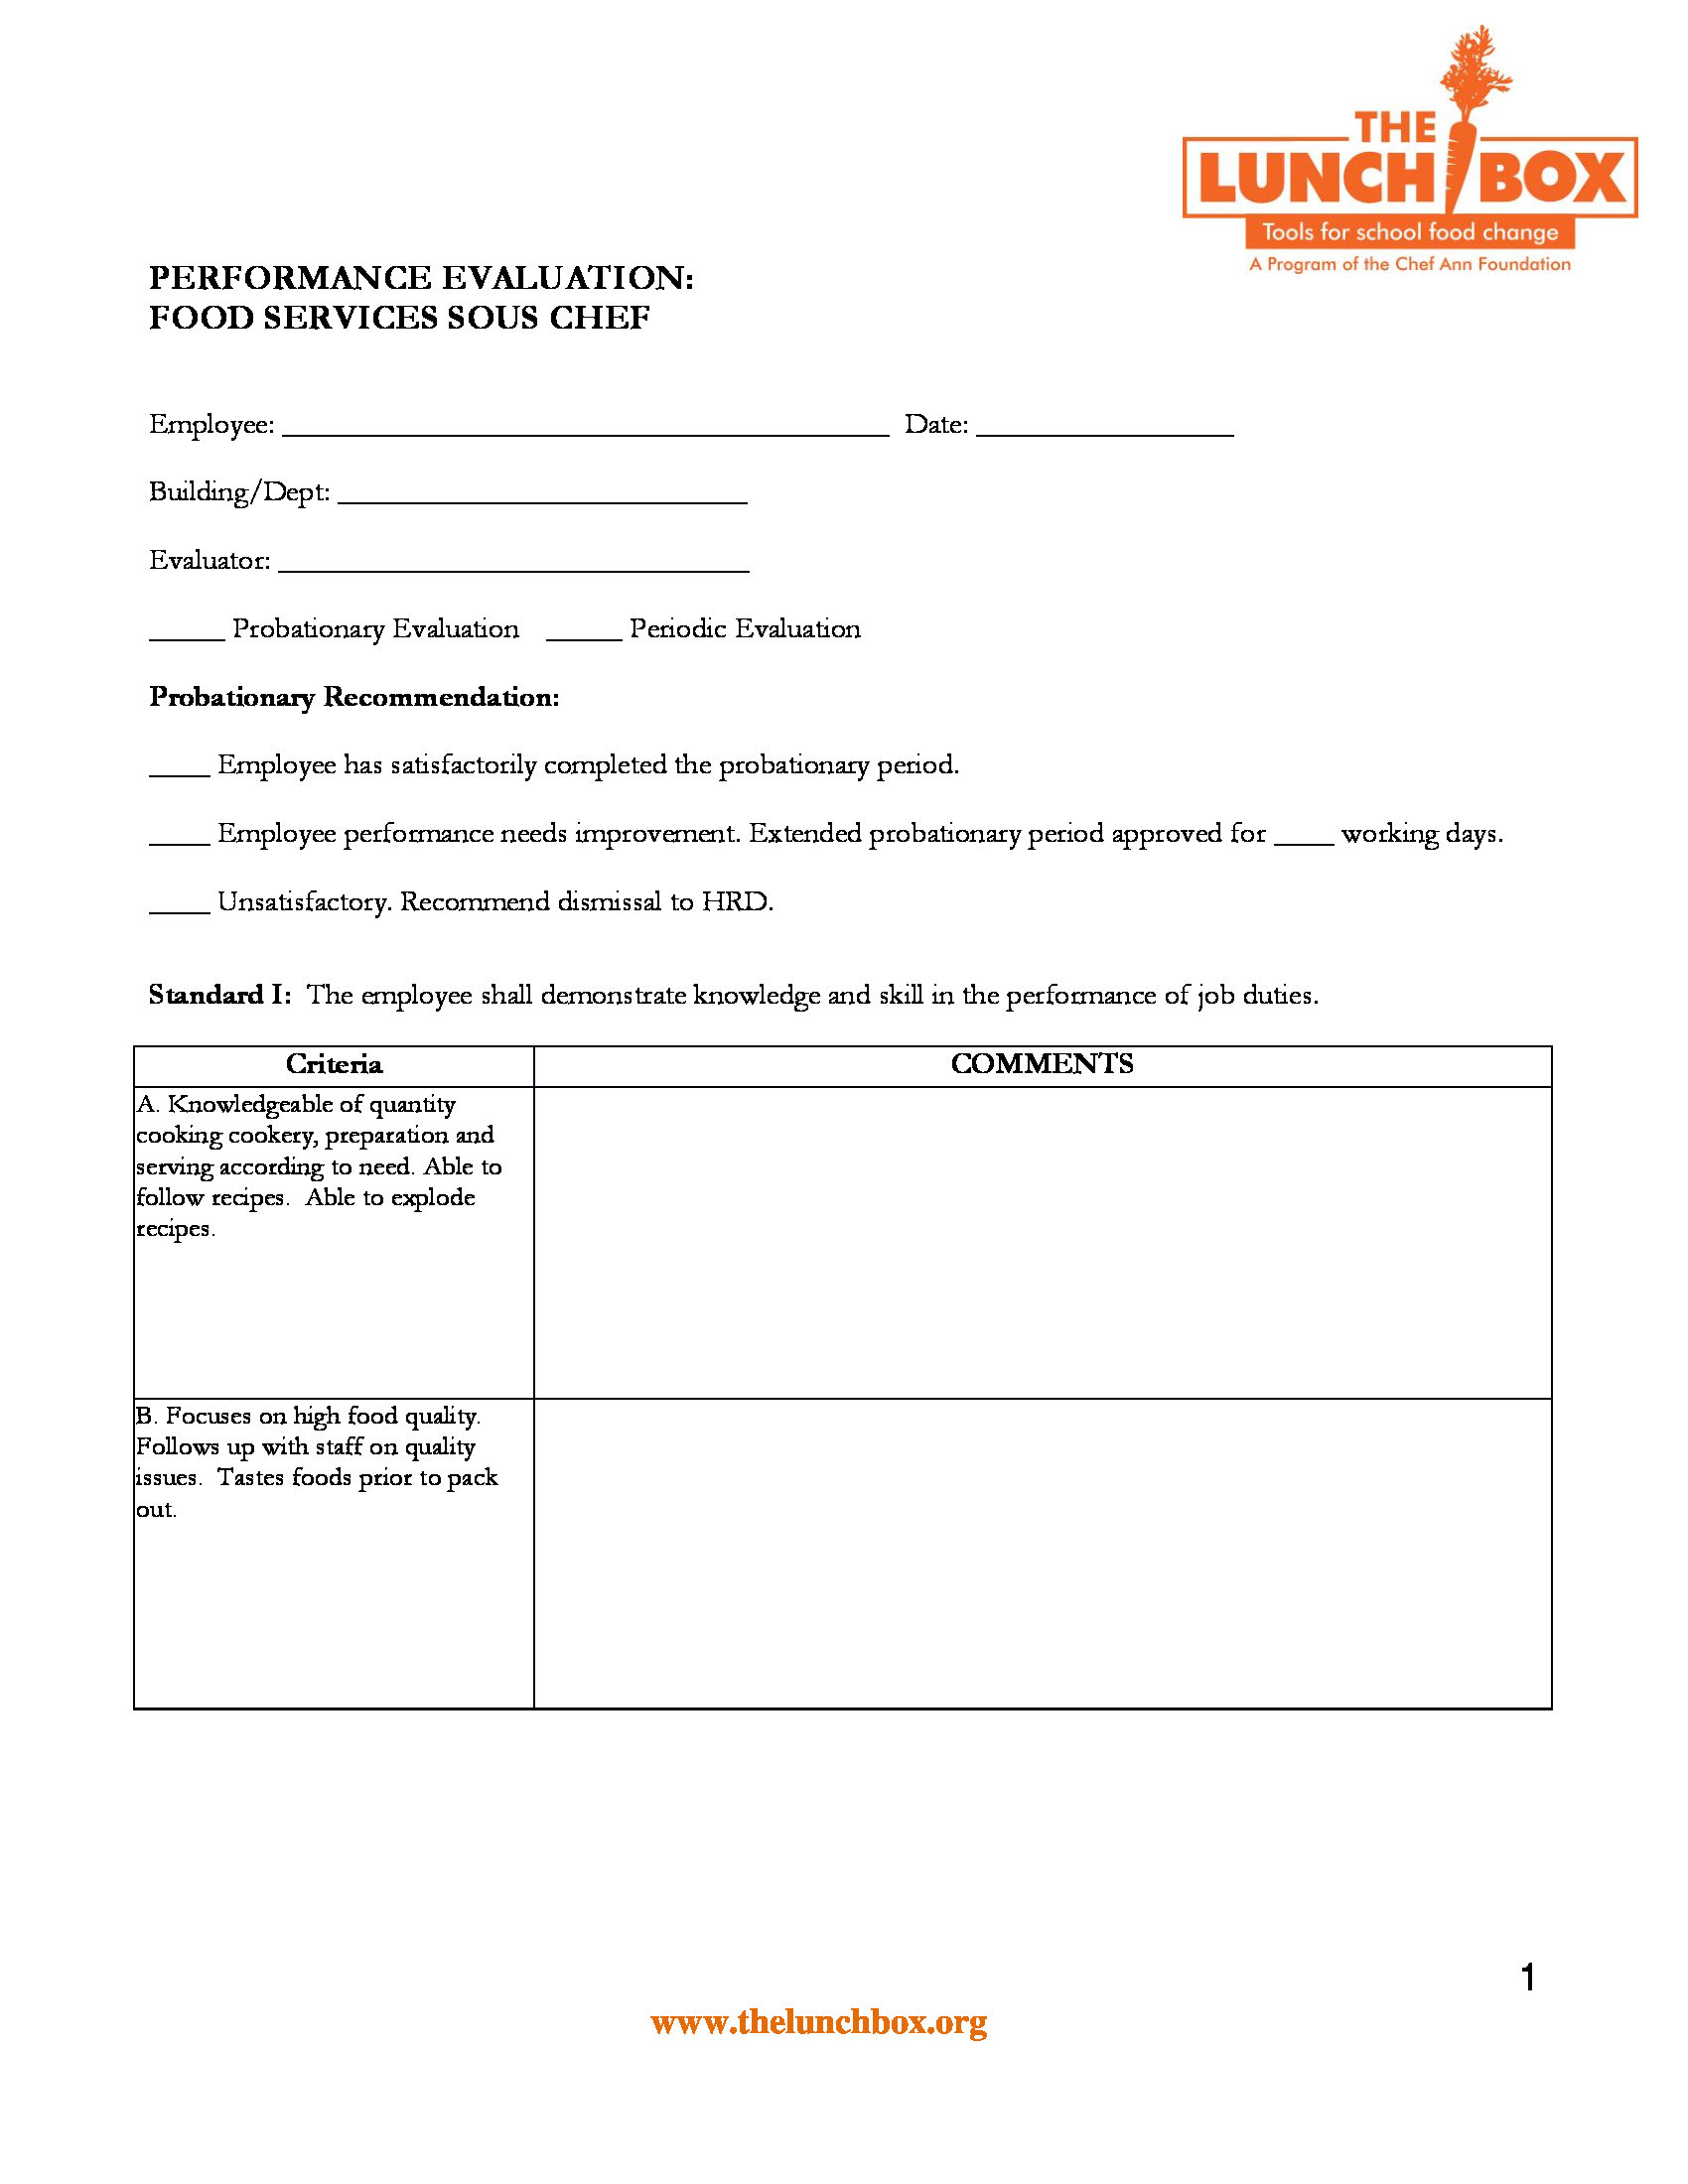 chef performance evaluation form 1